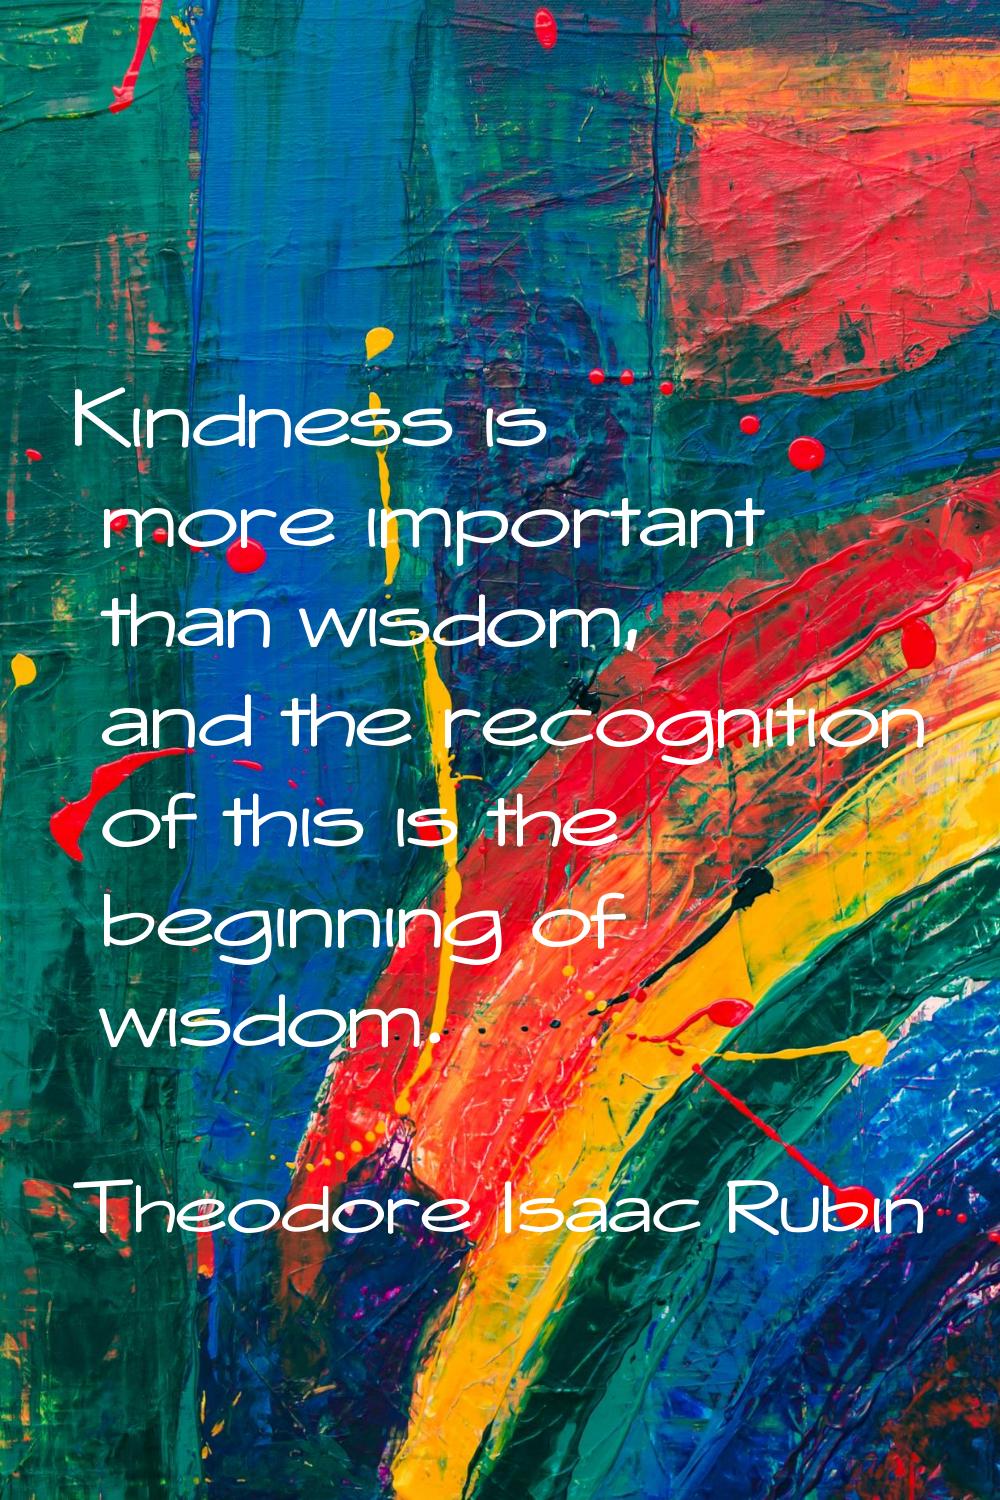 Kindness is more important than wisdom, and the recognition of this is the beginning of wisdom.